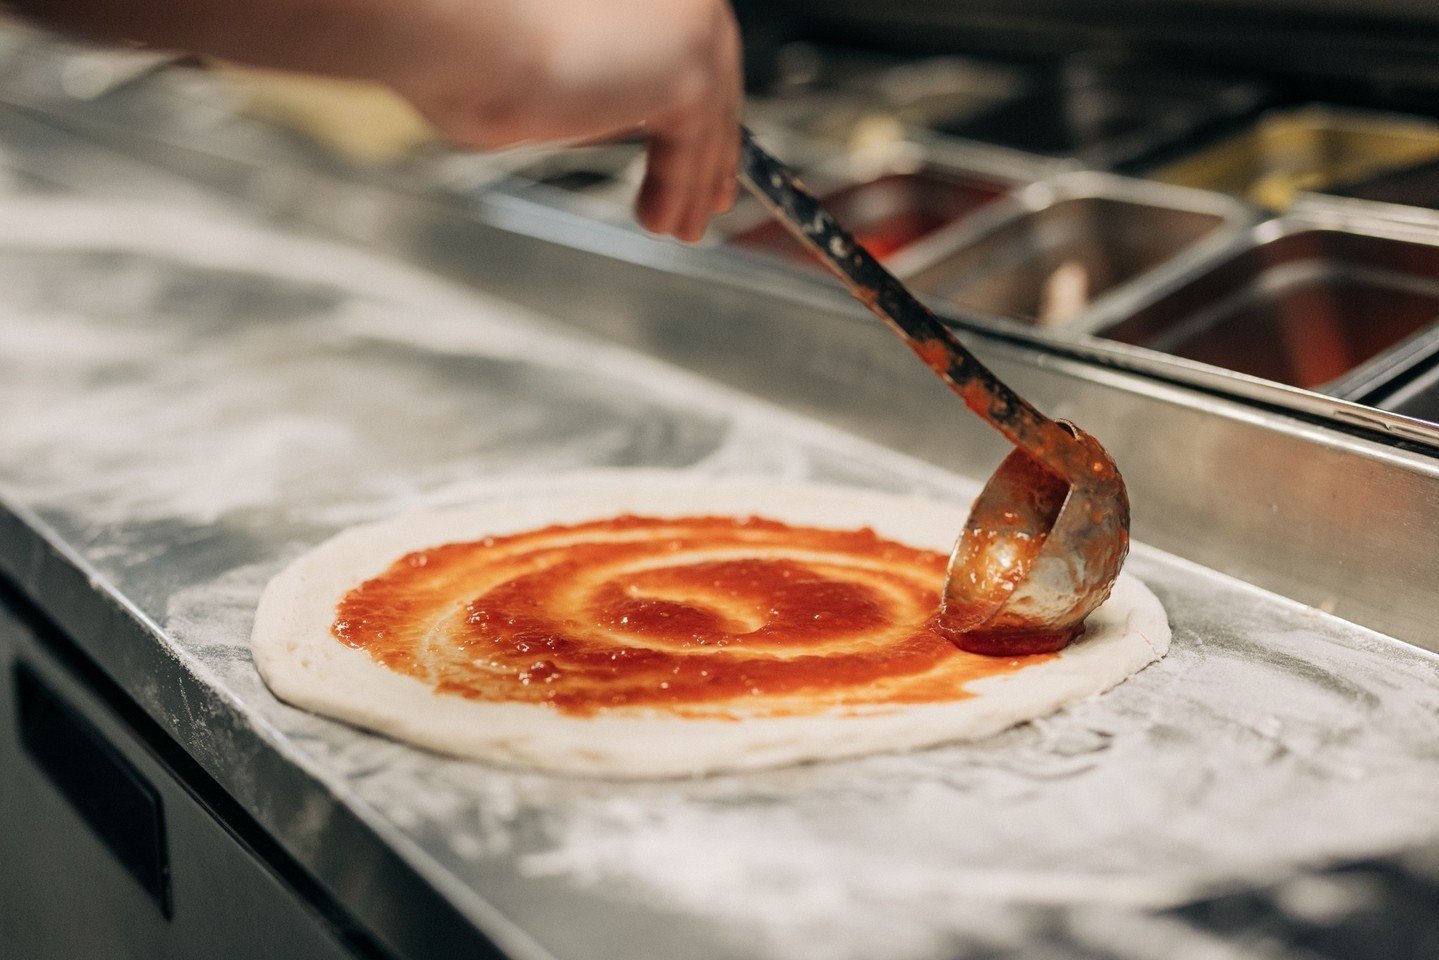 Our pizza dough is handmade in-house, using the freshest ingredients. Head in daily from 5pm to taste the difference! 🤌 #parrystgarage